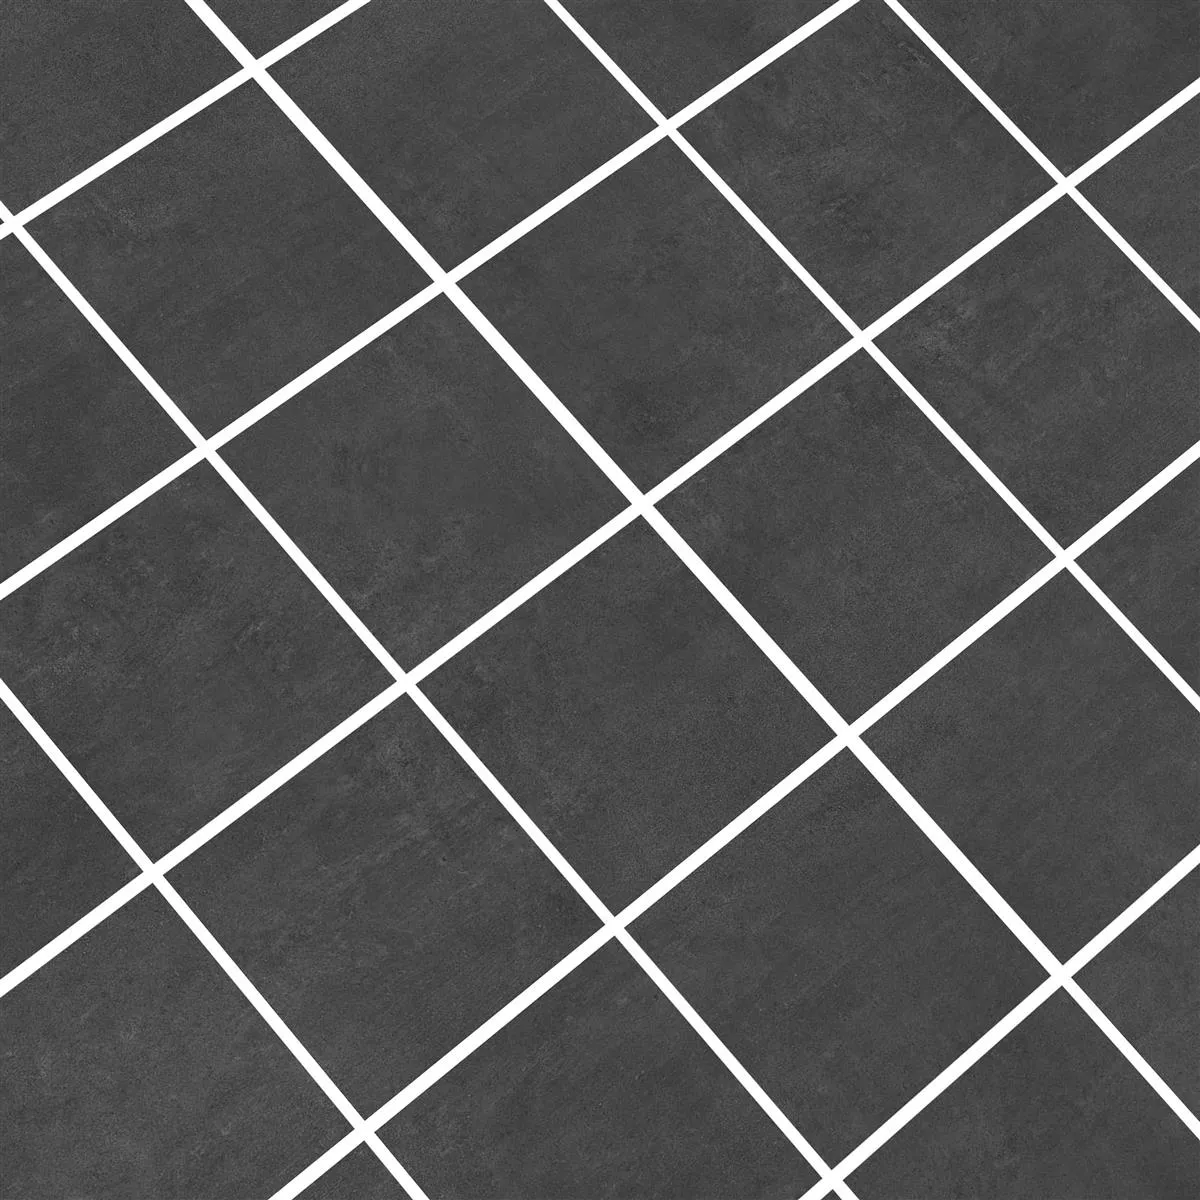 Mosaic Tiles Cairo Anthracite Square 6mm